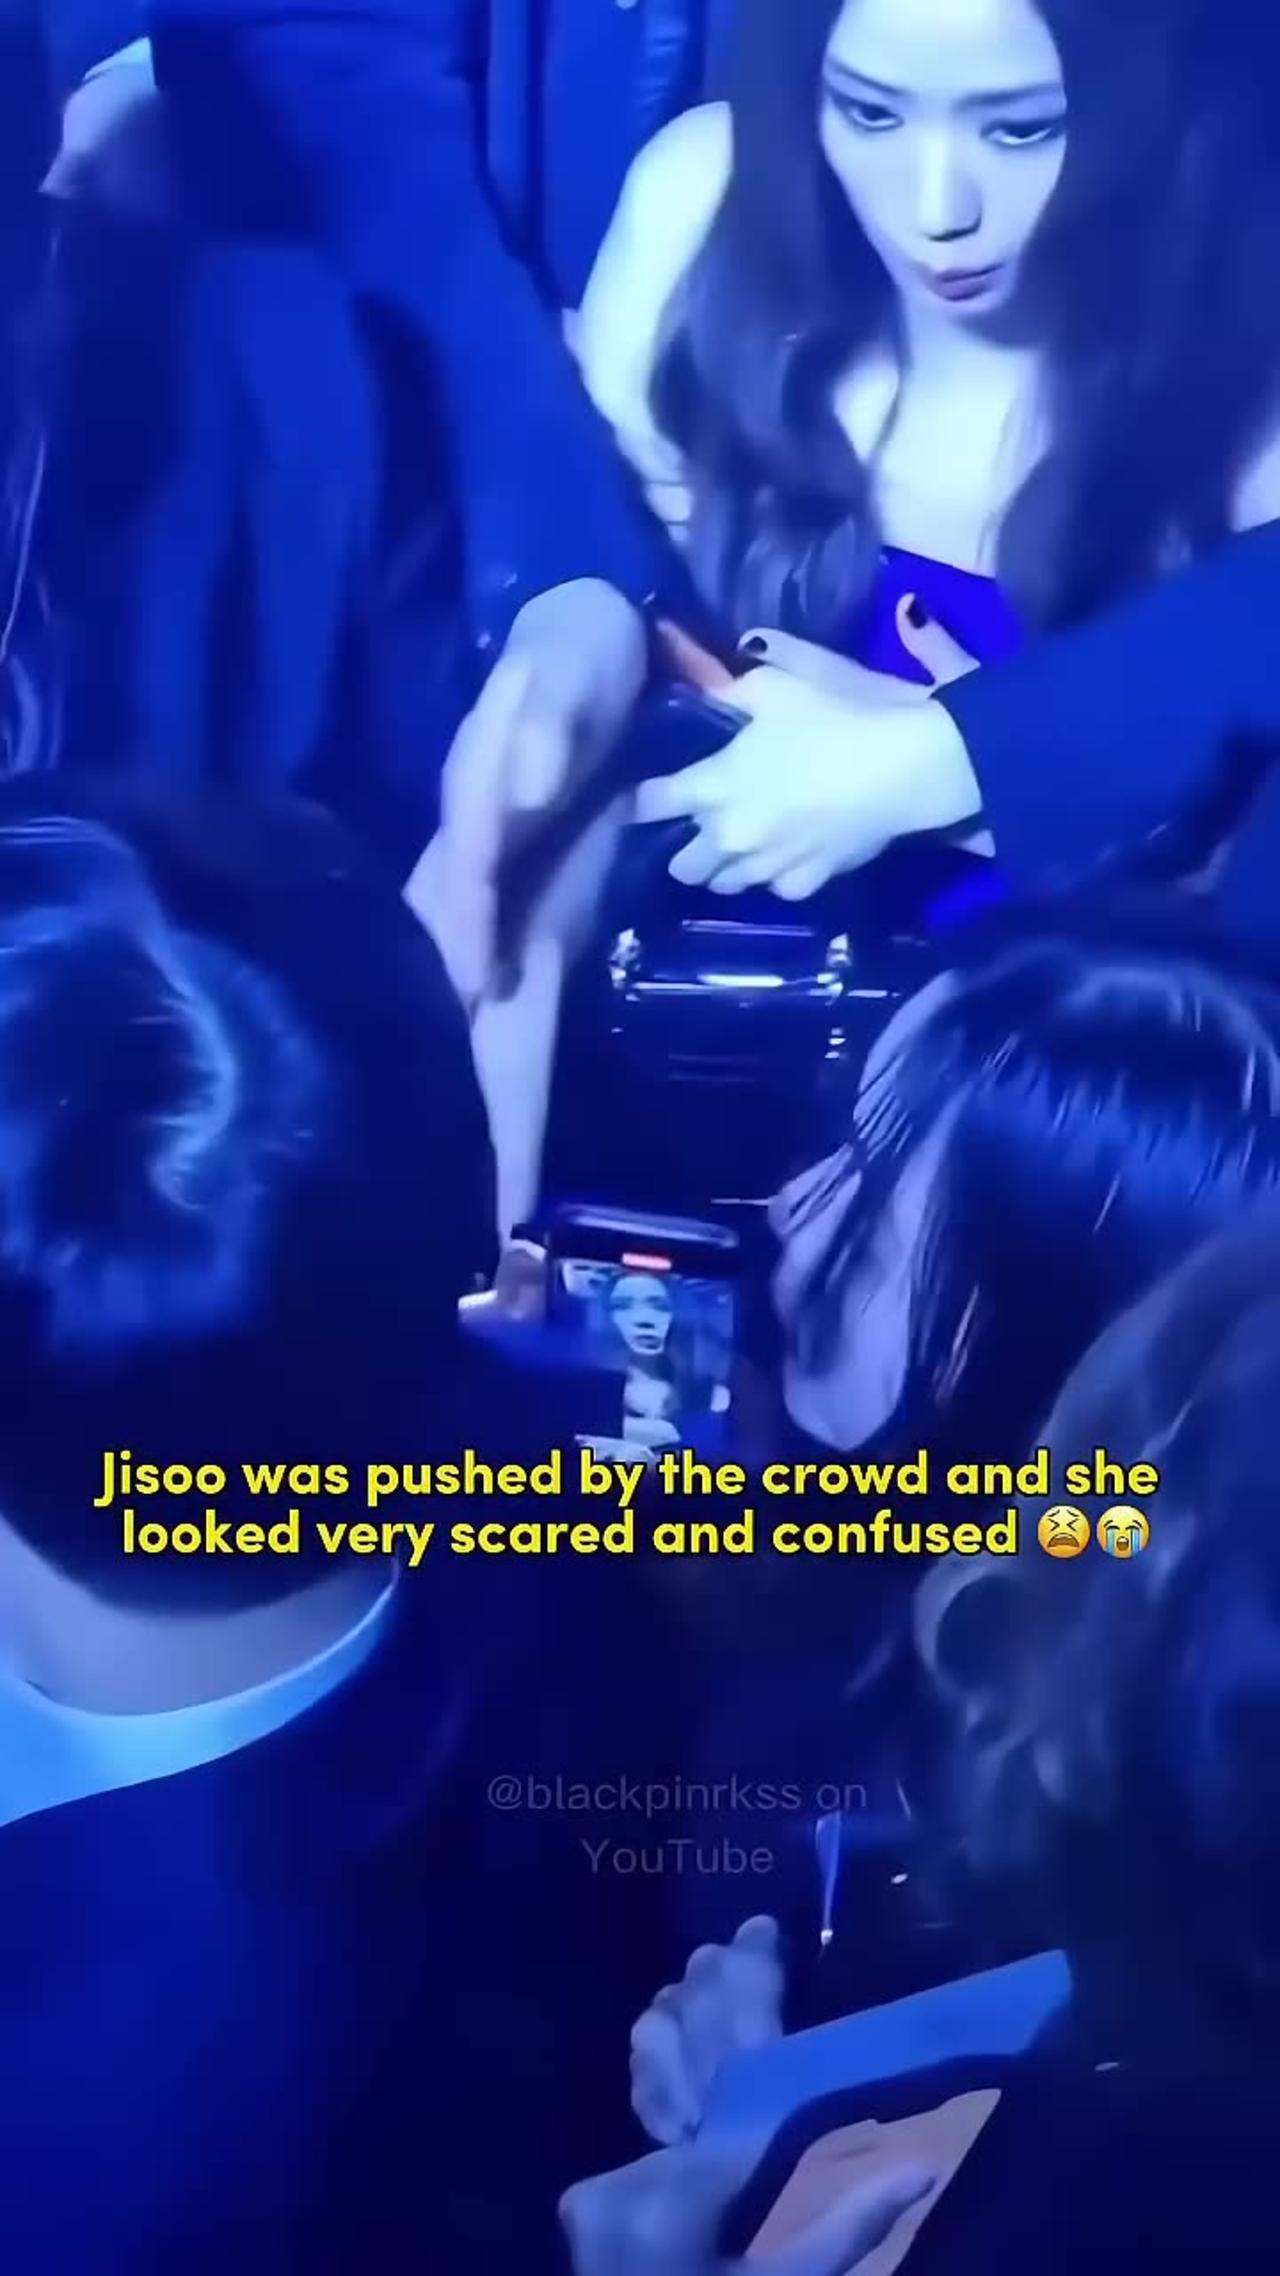 Everyone worked together to protect Jisoo from the crowd #shorts #blackpink #jisoo